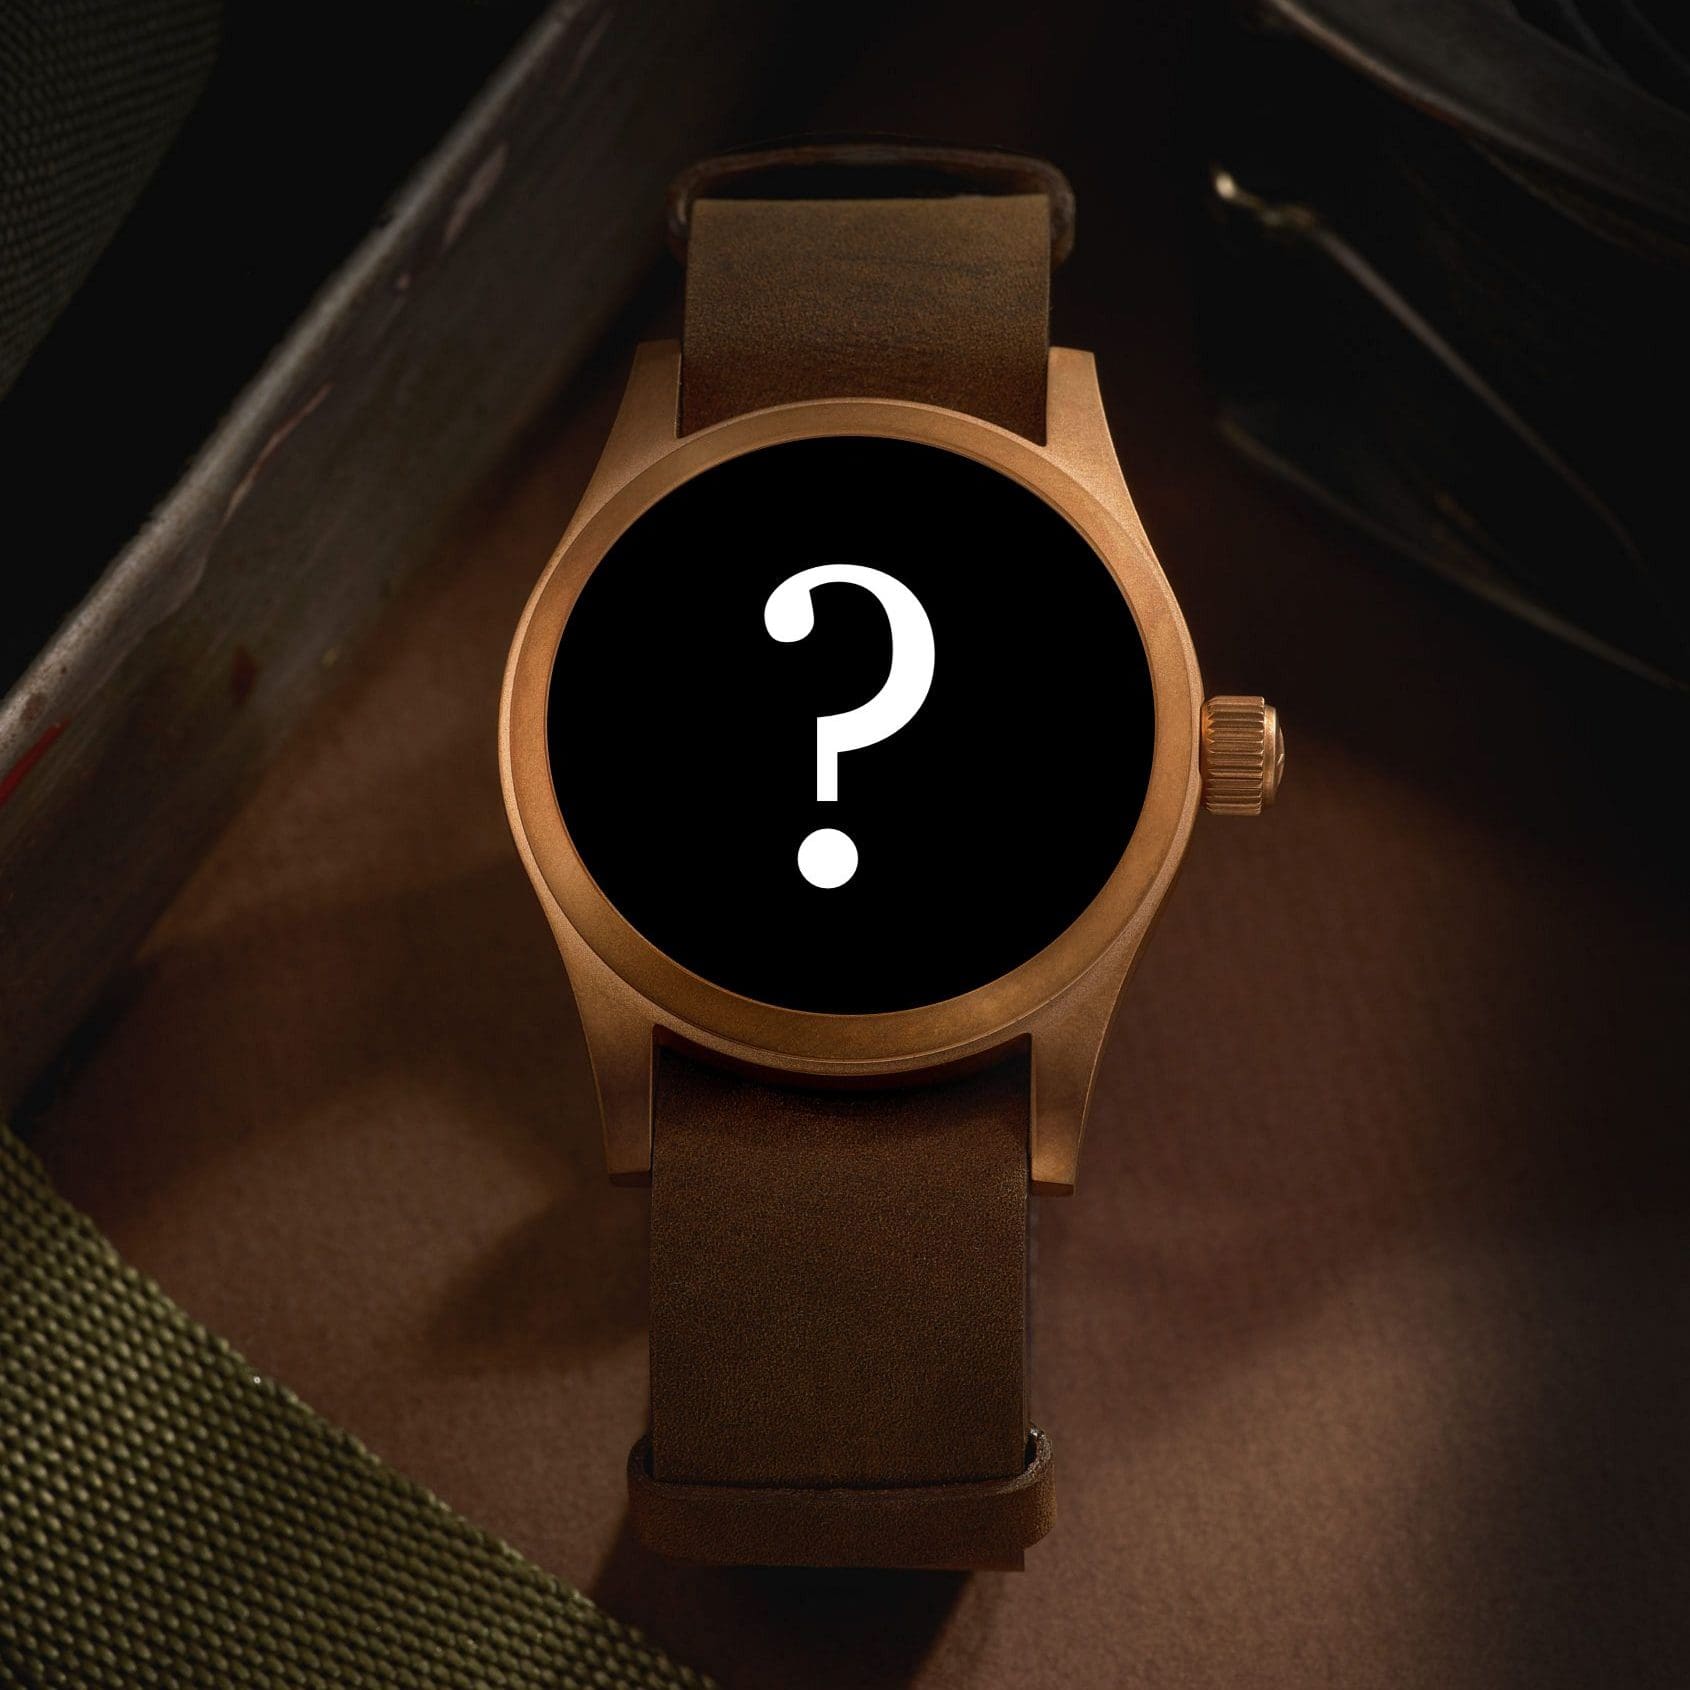 The Time+Tide audience has spoken: Your favourite watch under $1000 is…